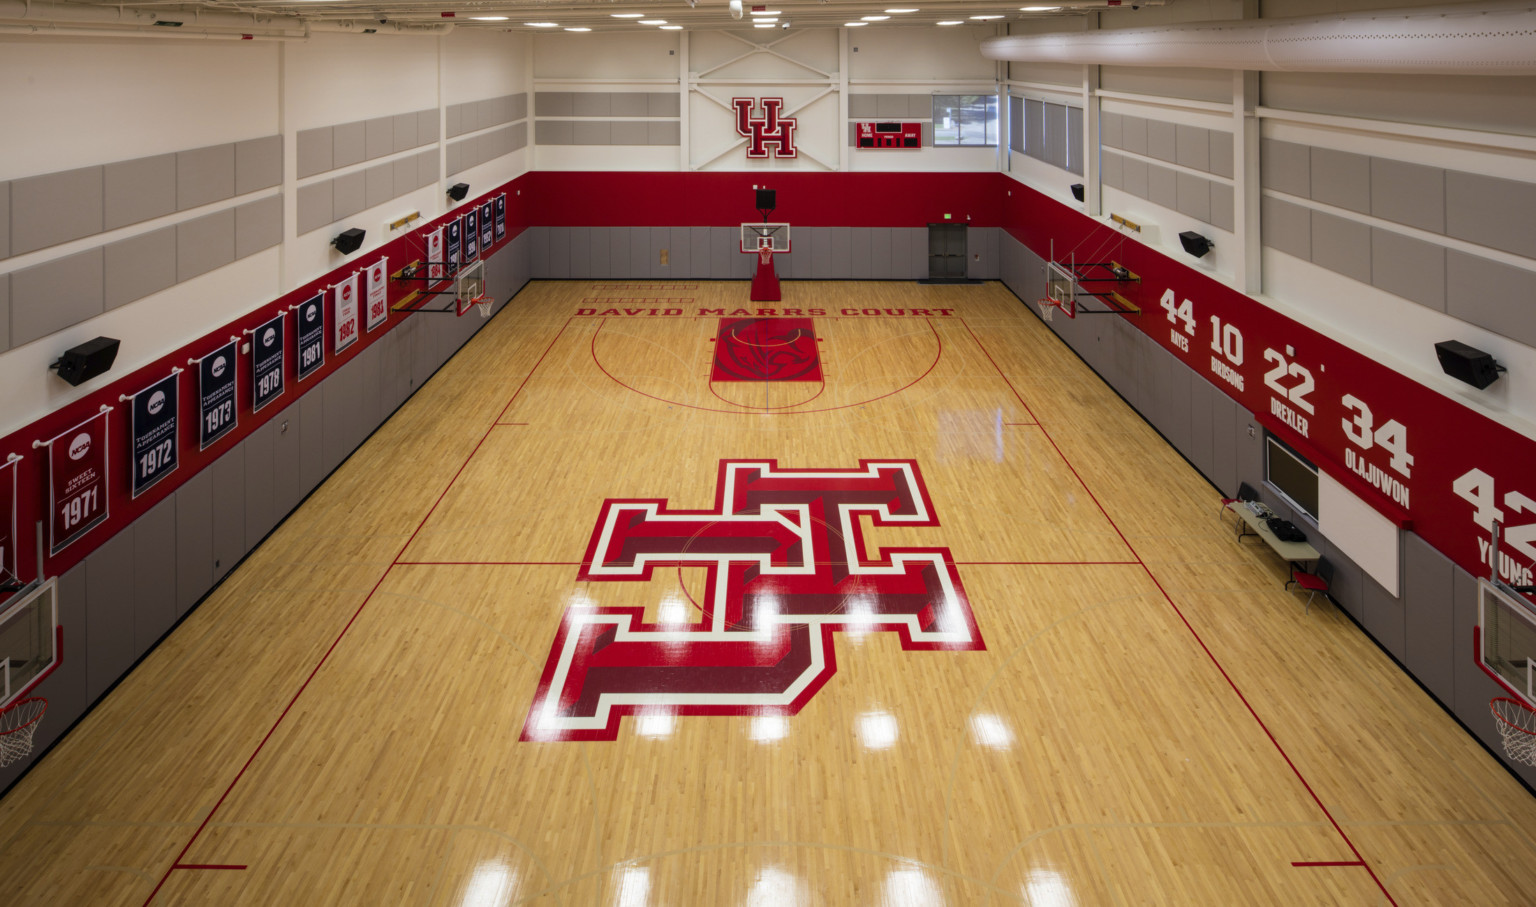 Wood practice court with basketball hoops along sides and UH logo at center. Grey and red stripes on walls with banners left